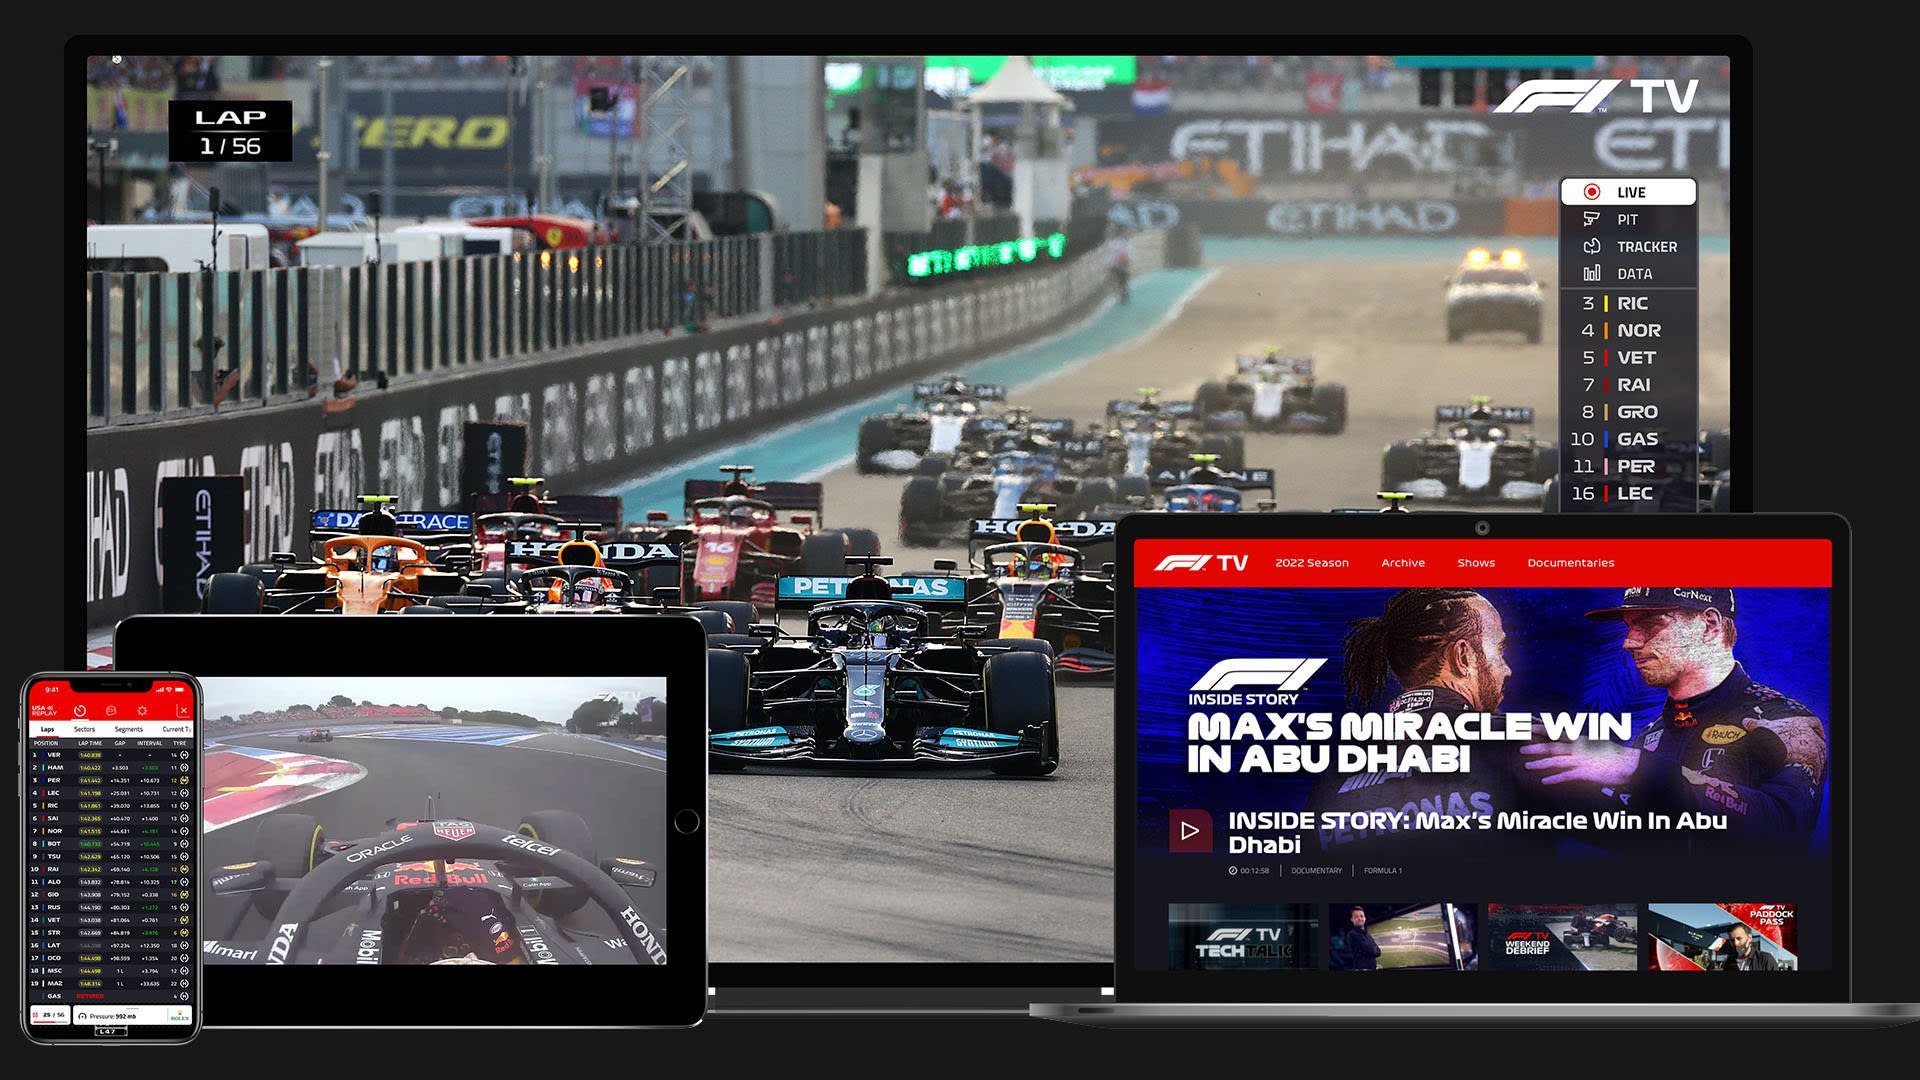 How to get the most from F1 TV Pro over a Grand Prix weekend